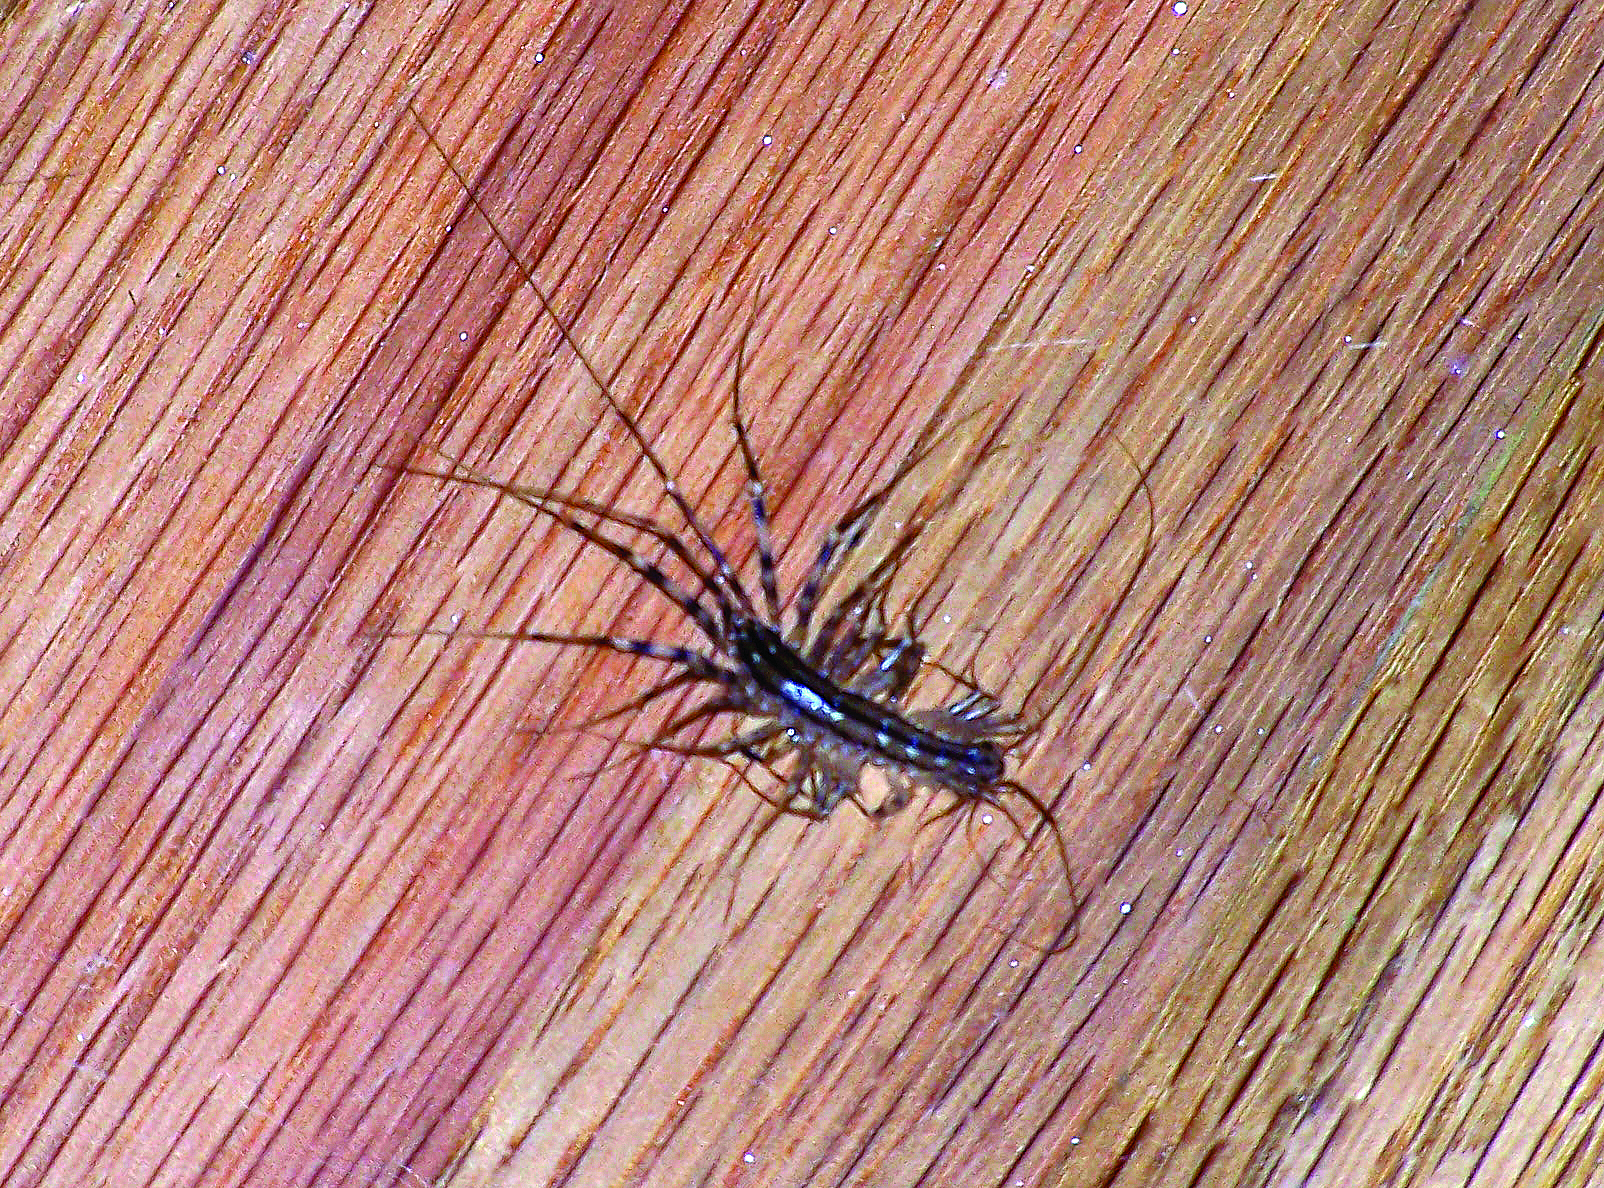 Bugs In My Bathroom Sink With Many Legs